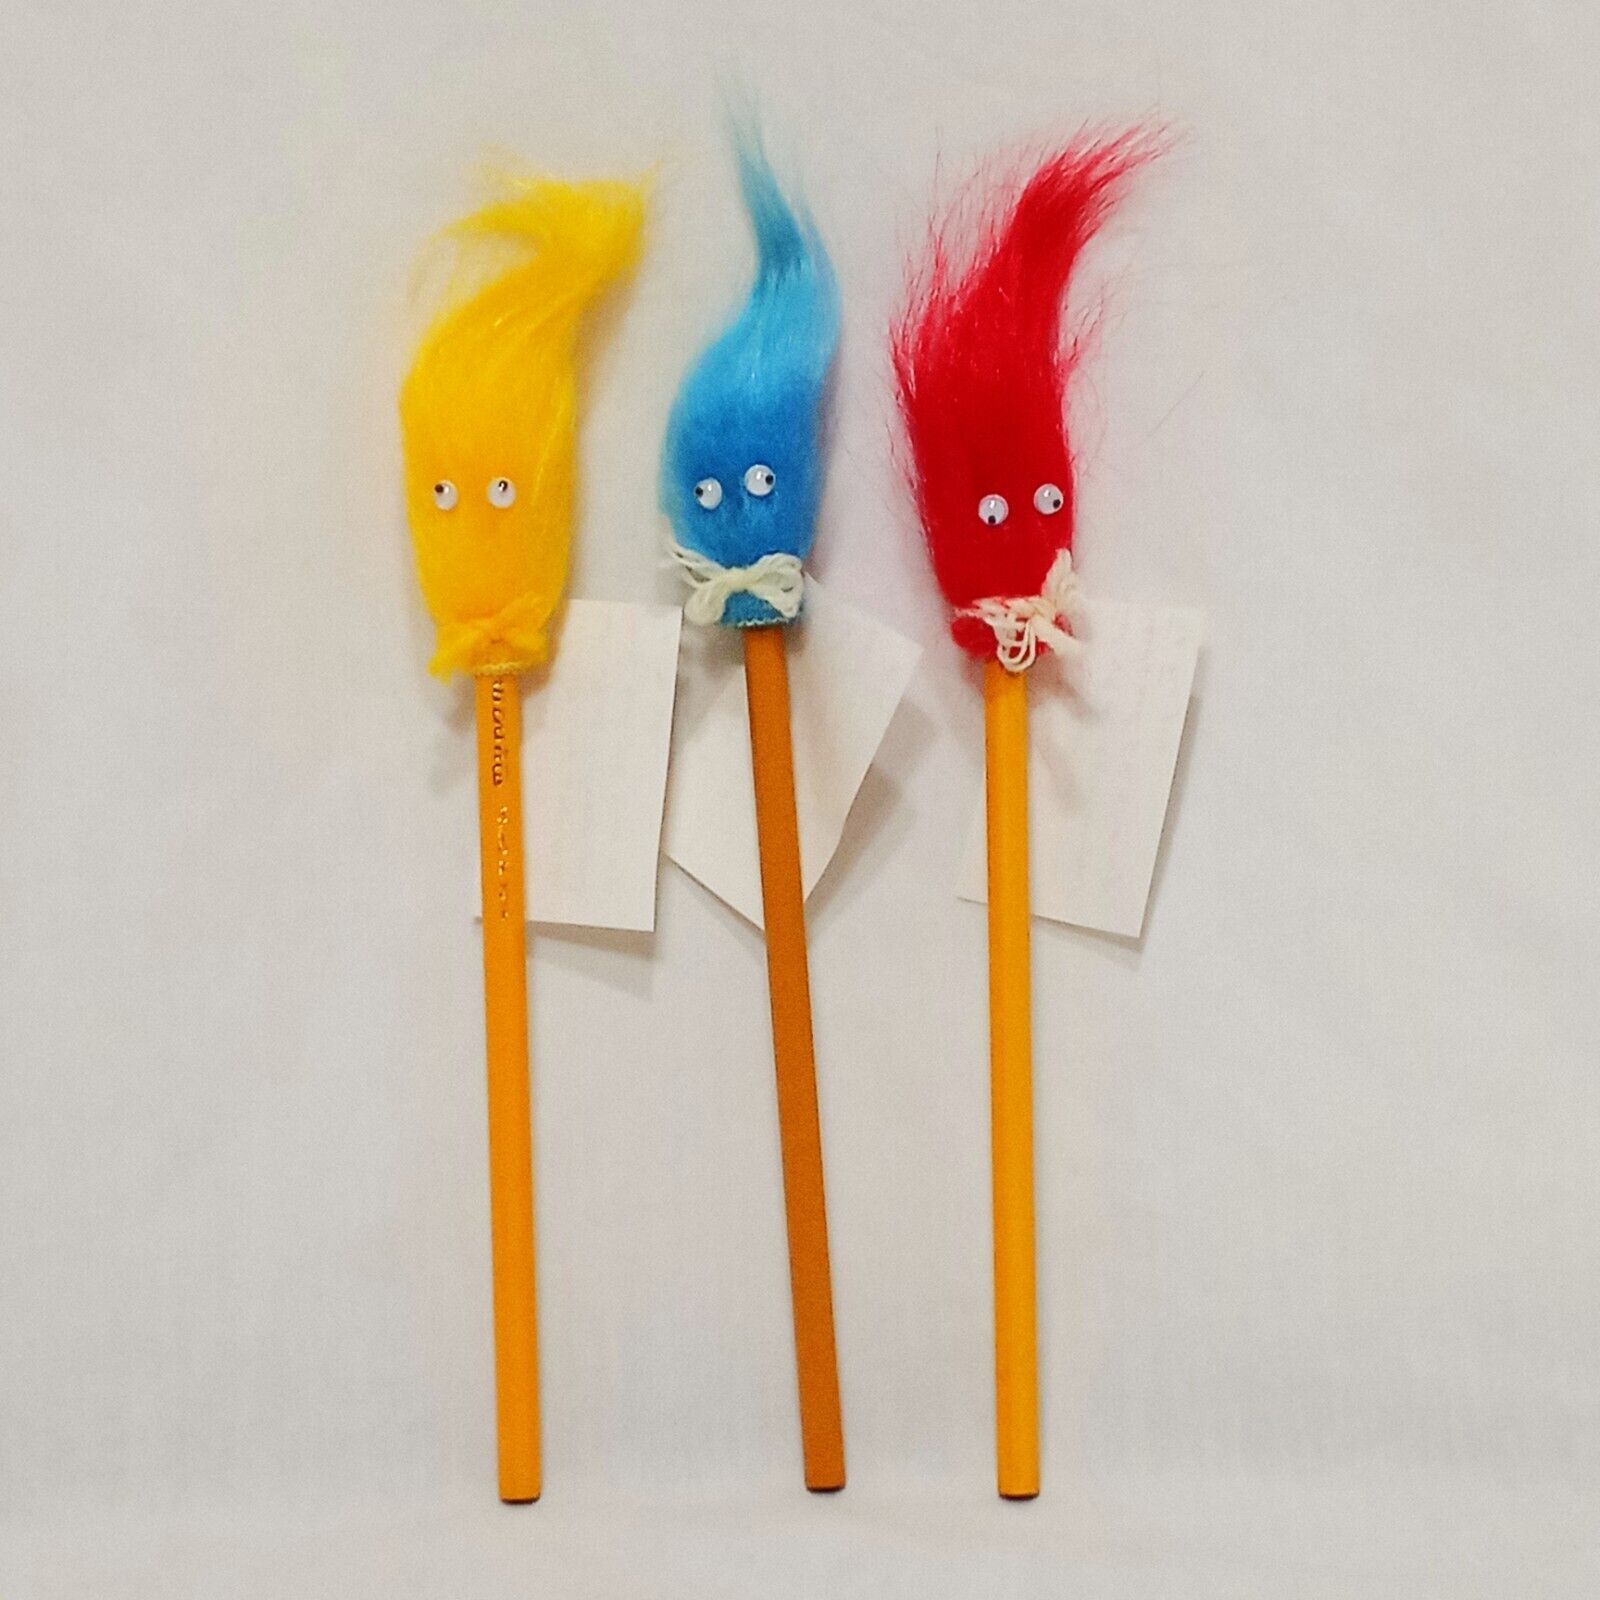 Lot 3 Frustration Pencils Yellow Red Blue 1980's Fur Monster Furry Vintage New